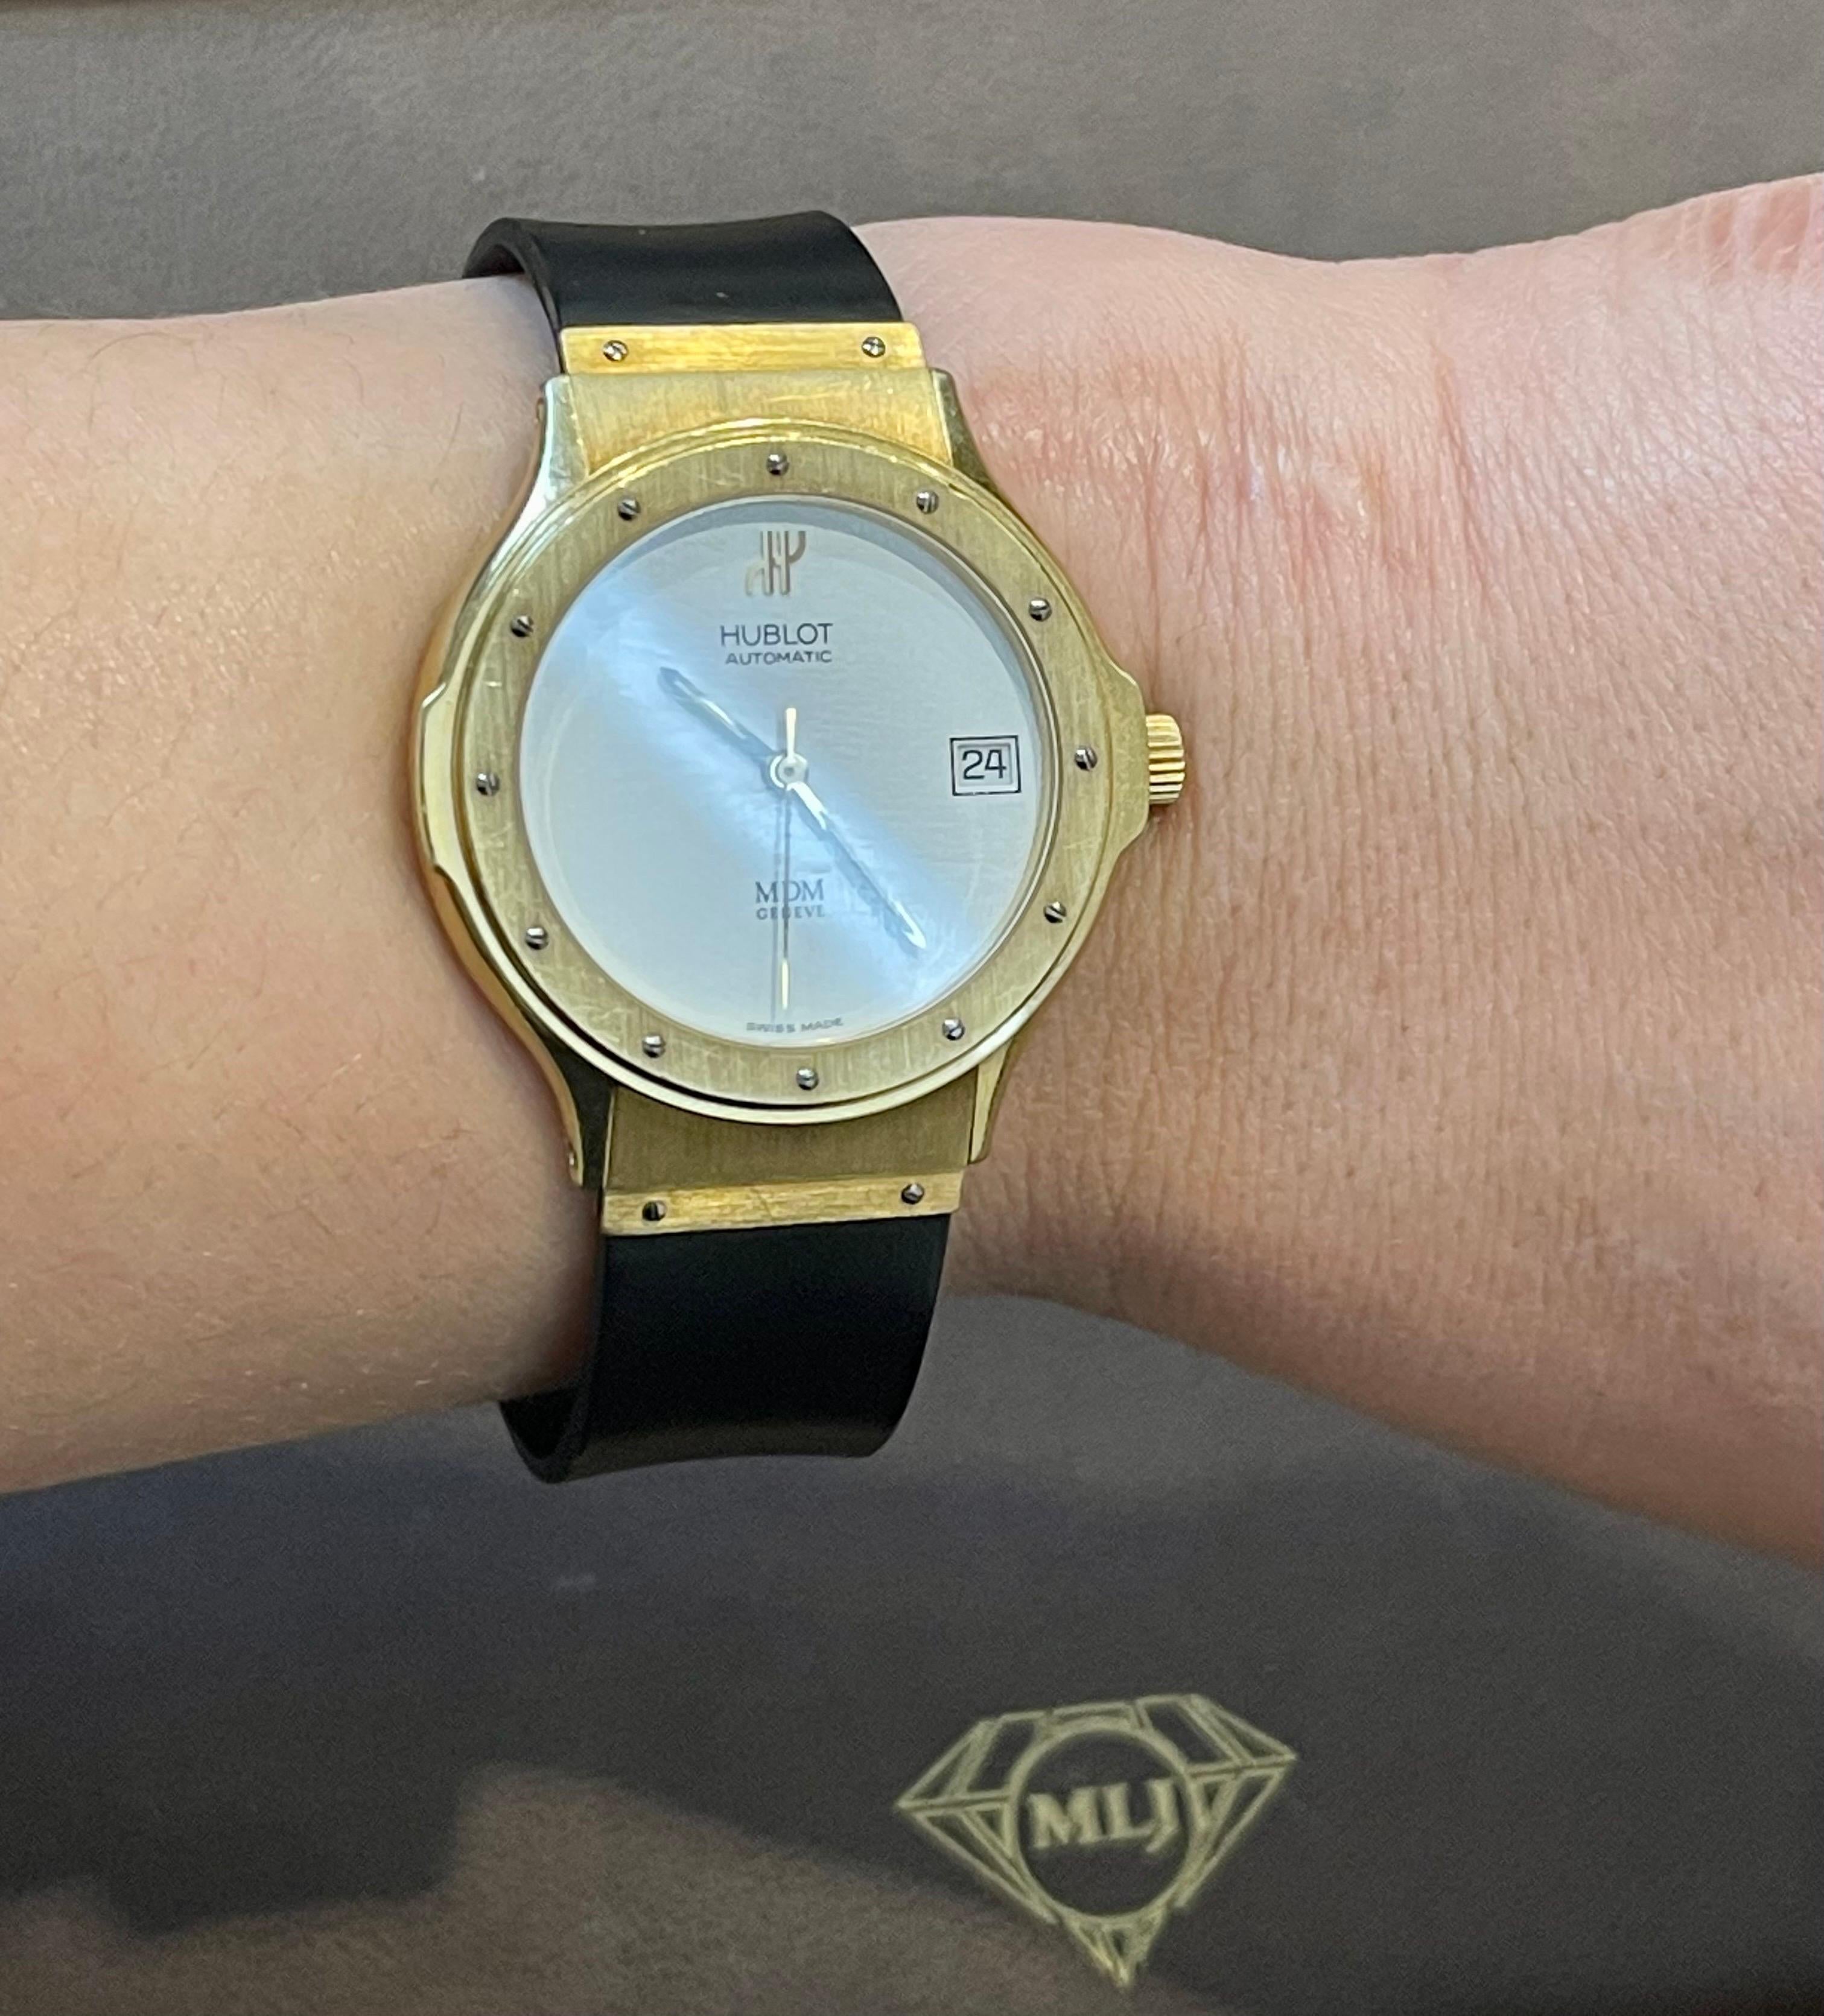 Offered here Unisex Hublot MDM in a 36 mm across case. This watch was made in the 1990s.
Reference 1581.3 indicating an automatic movement model.
The case is 18K gold. 
White dial without the hour markers. Quick set date aperture at 3 o'clock.
The